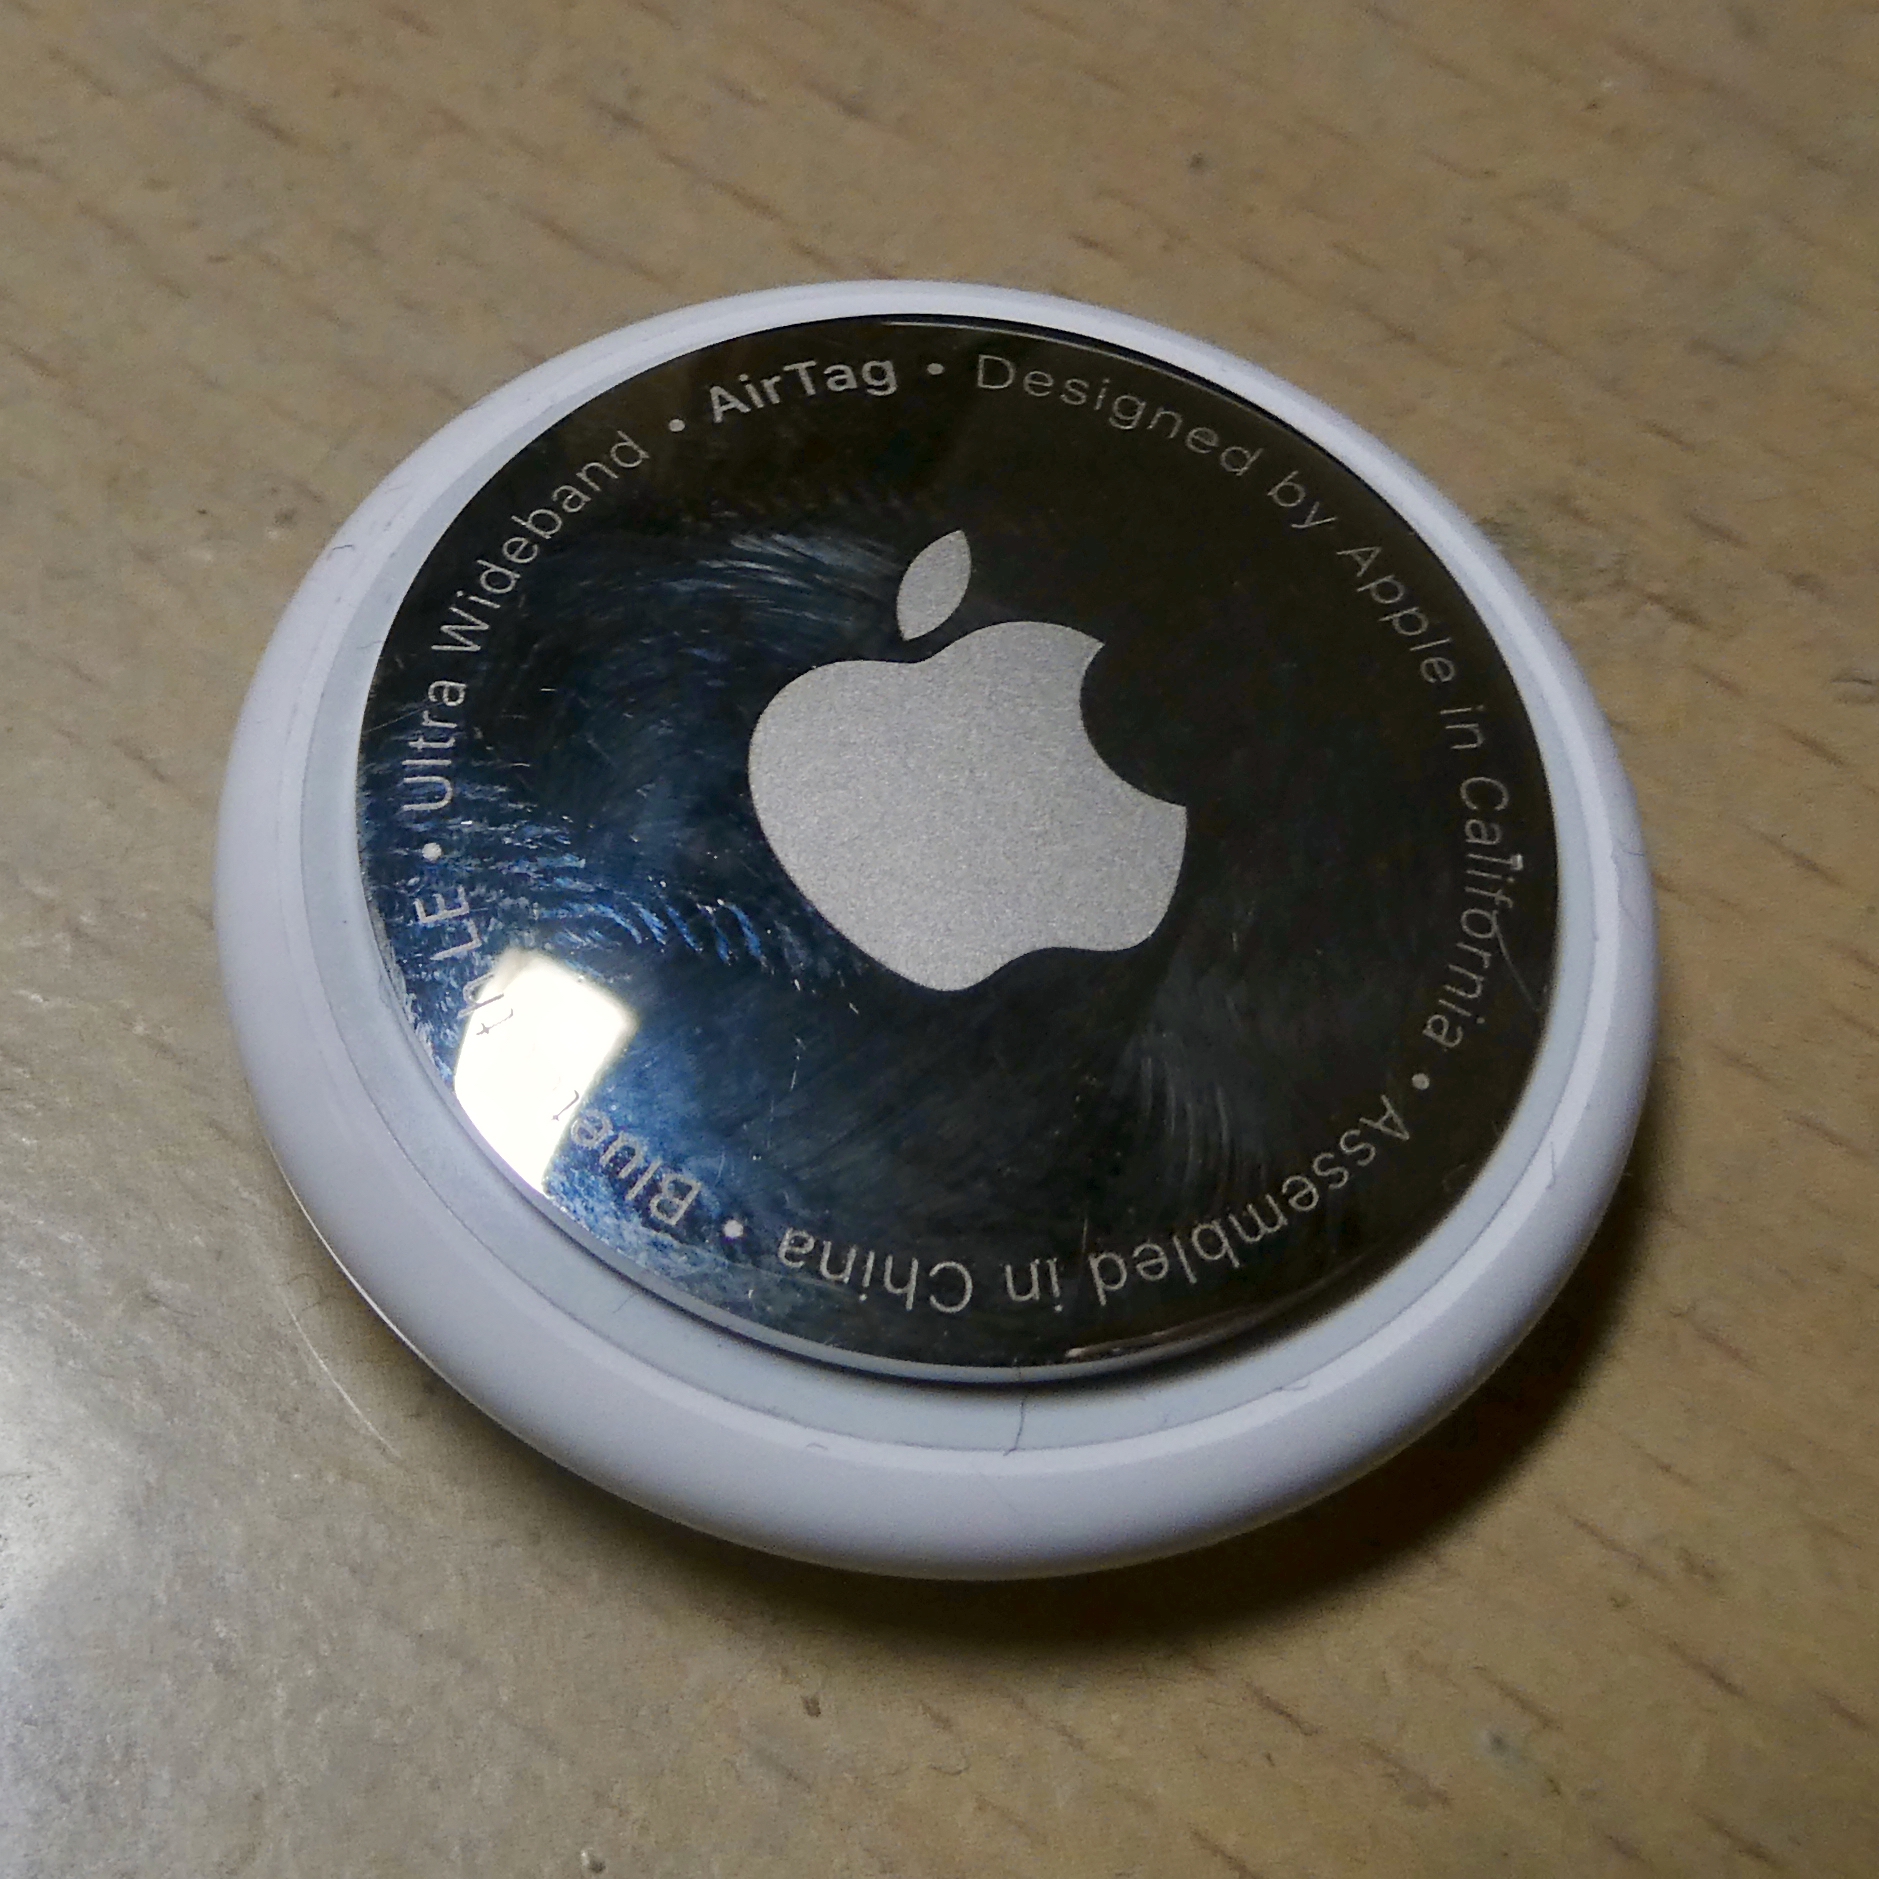 Apple AirTags and Your Safety - UW–Madison Police Department